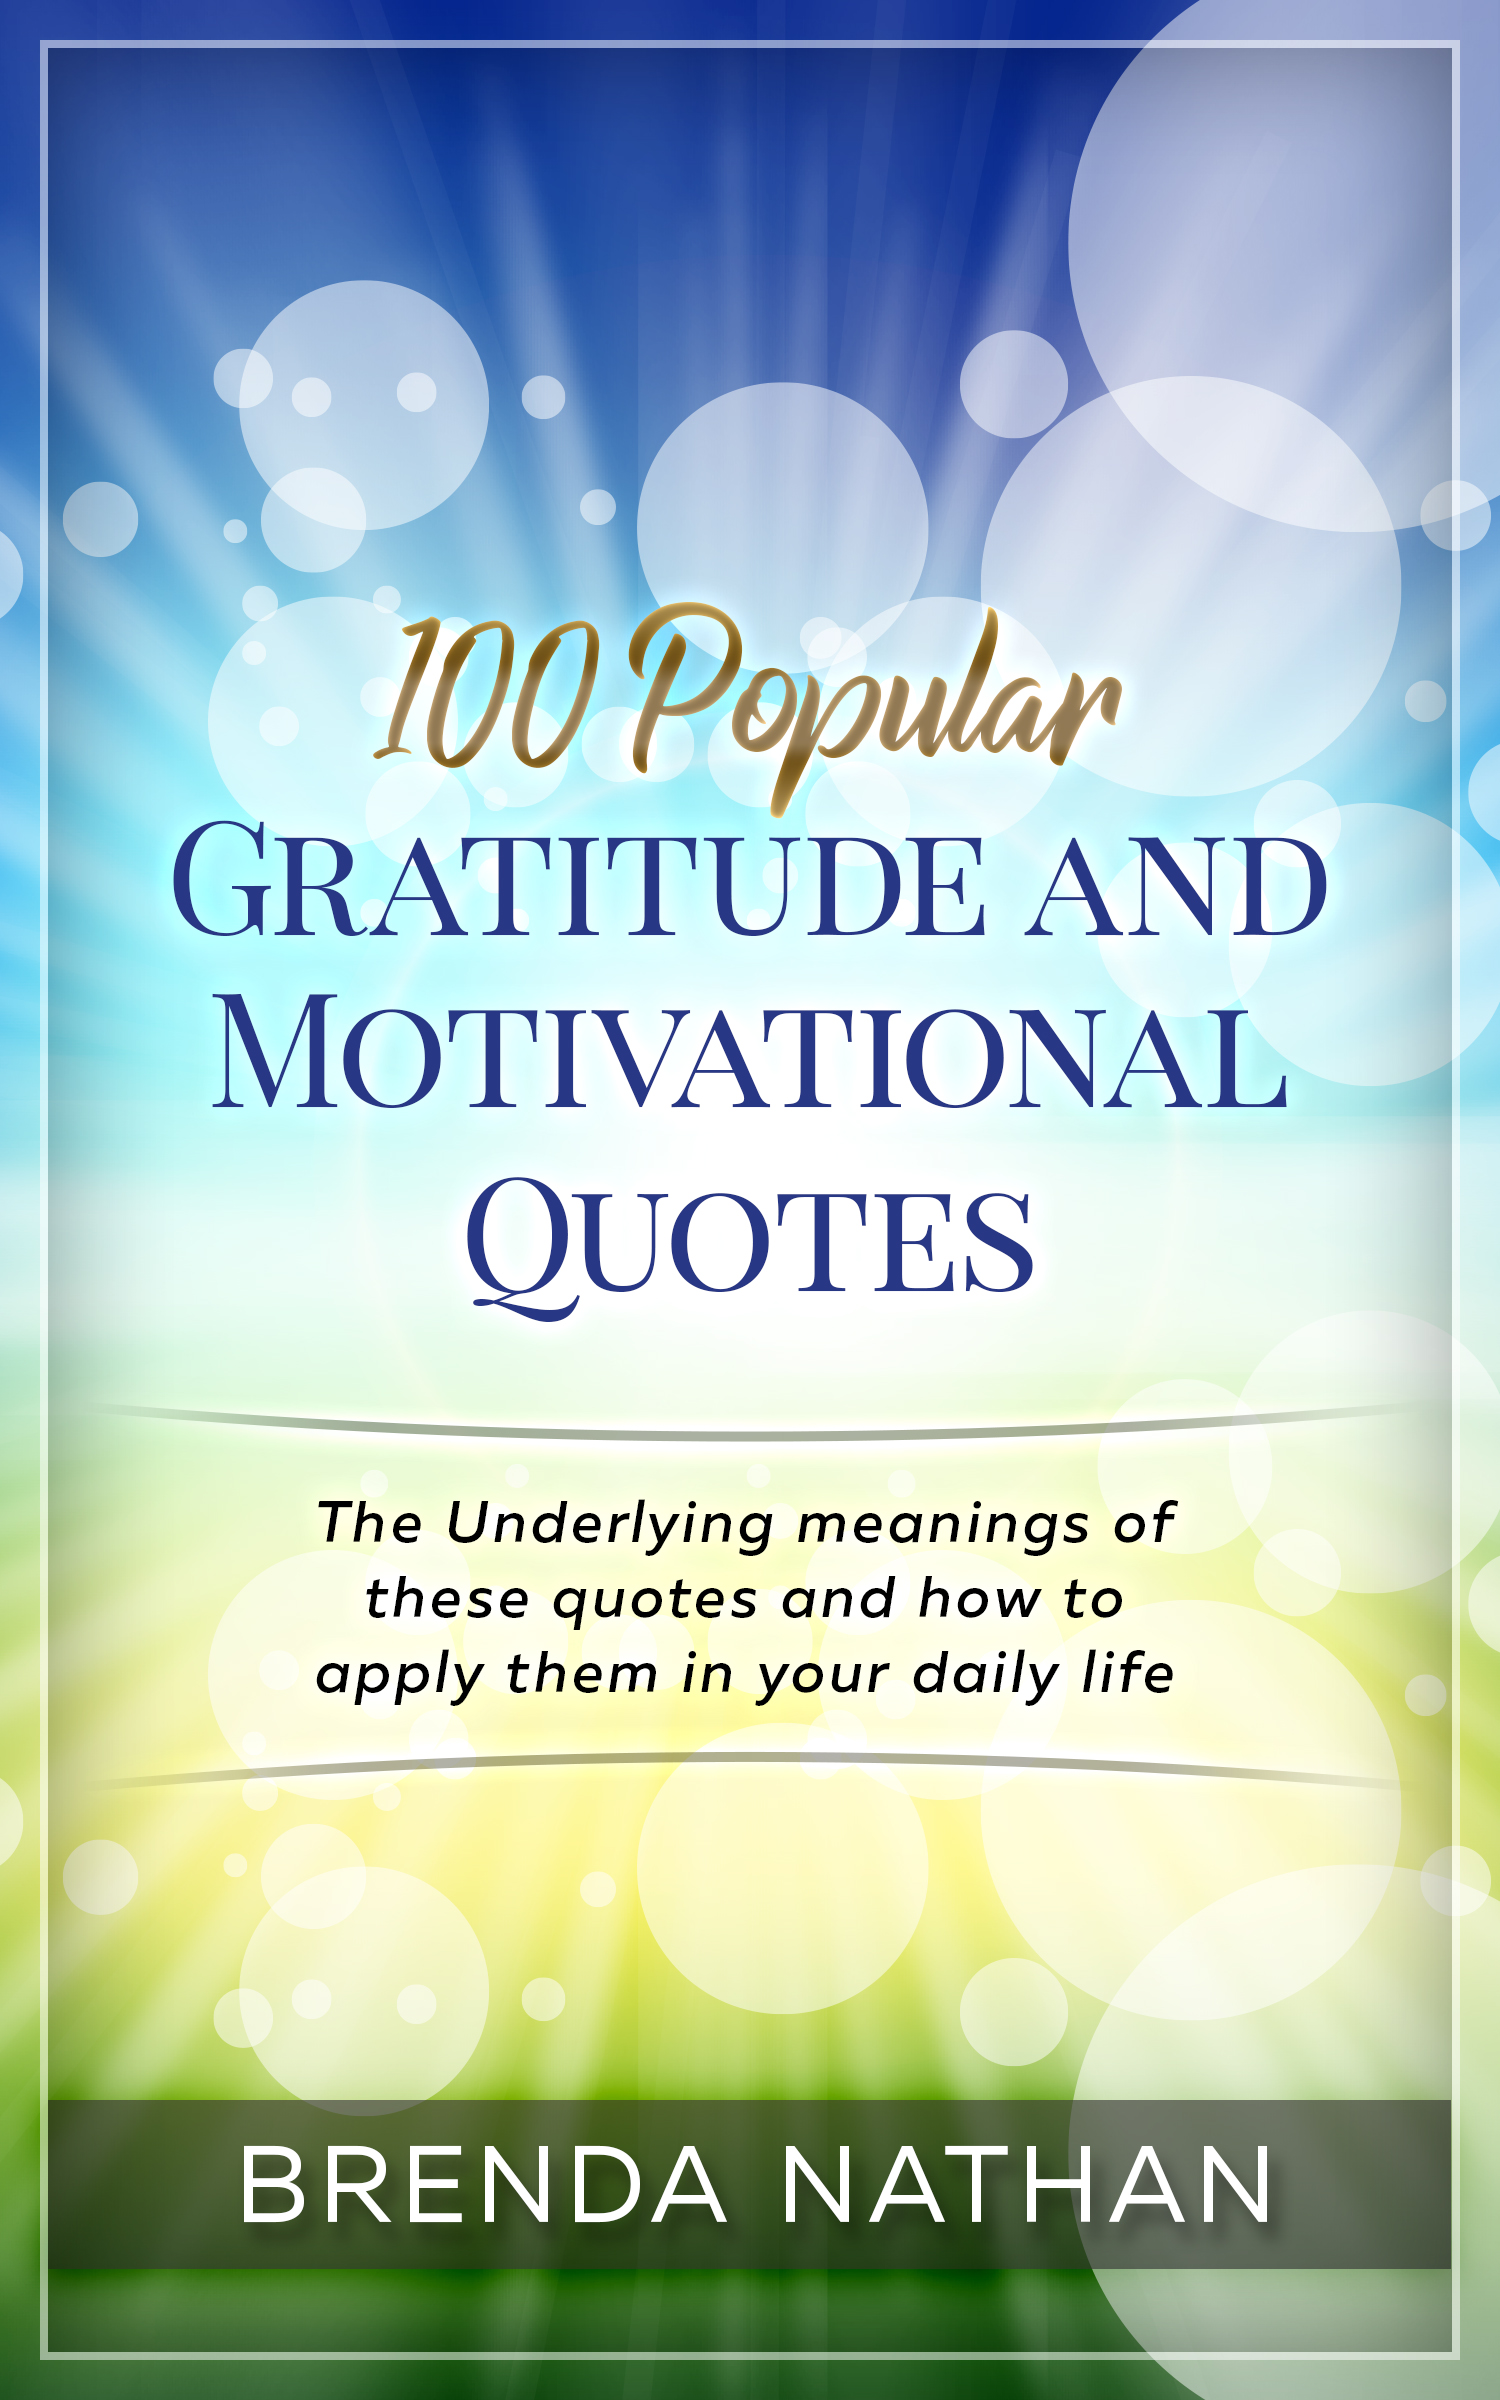 FREE: 100 Popular Gratitude and Motivational Quotes by BRENDA NATHAN